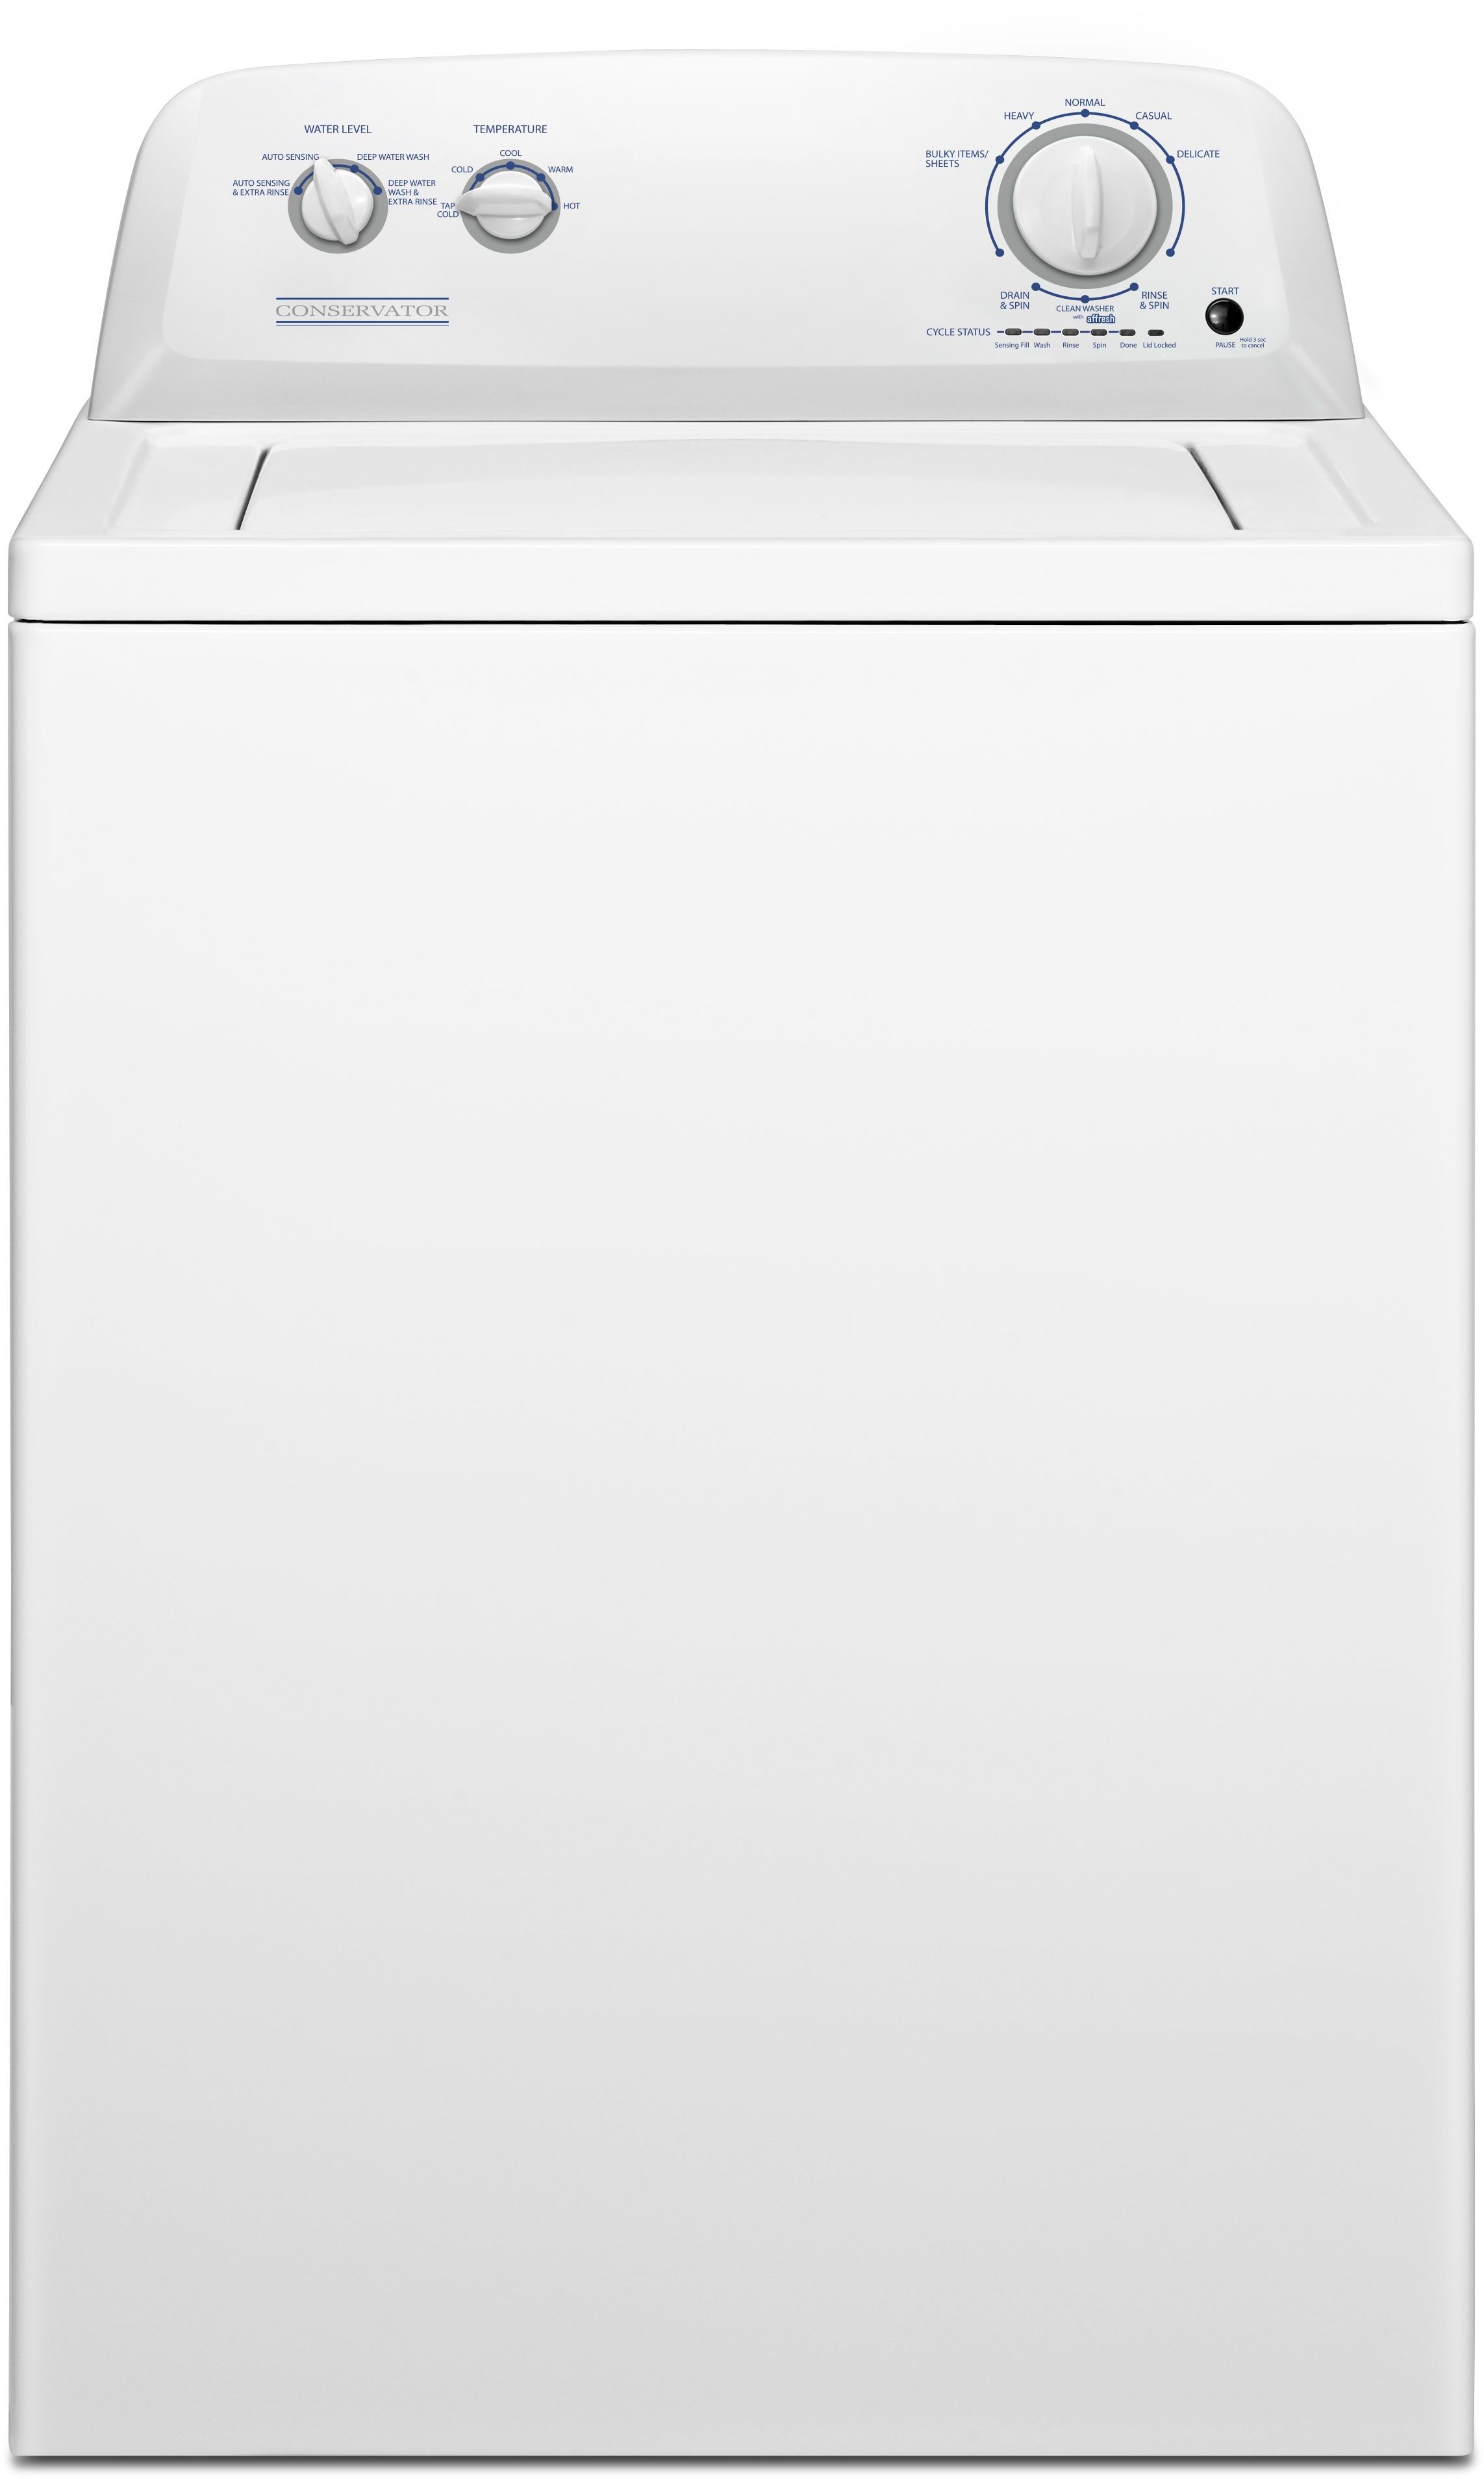 Crosley® Conservator 3.5 Cu. Ft. White Top Load Washer